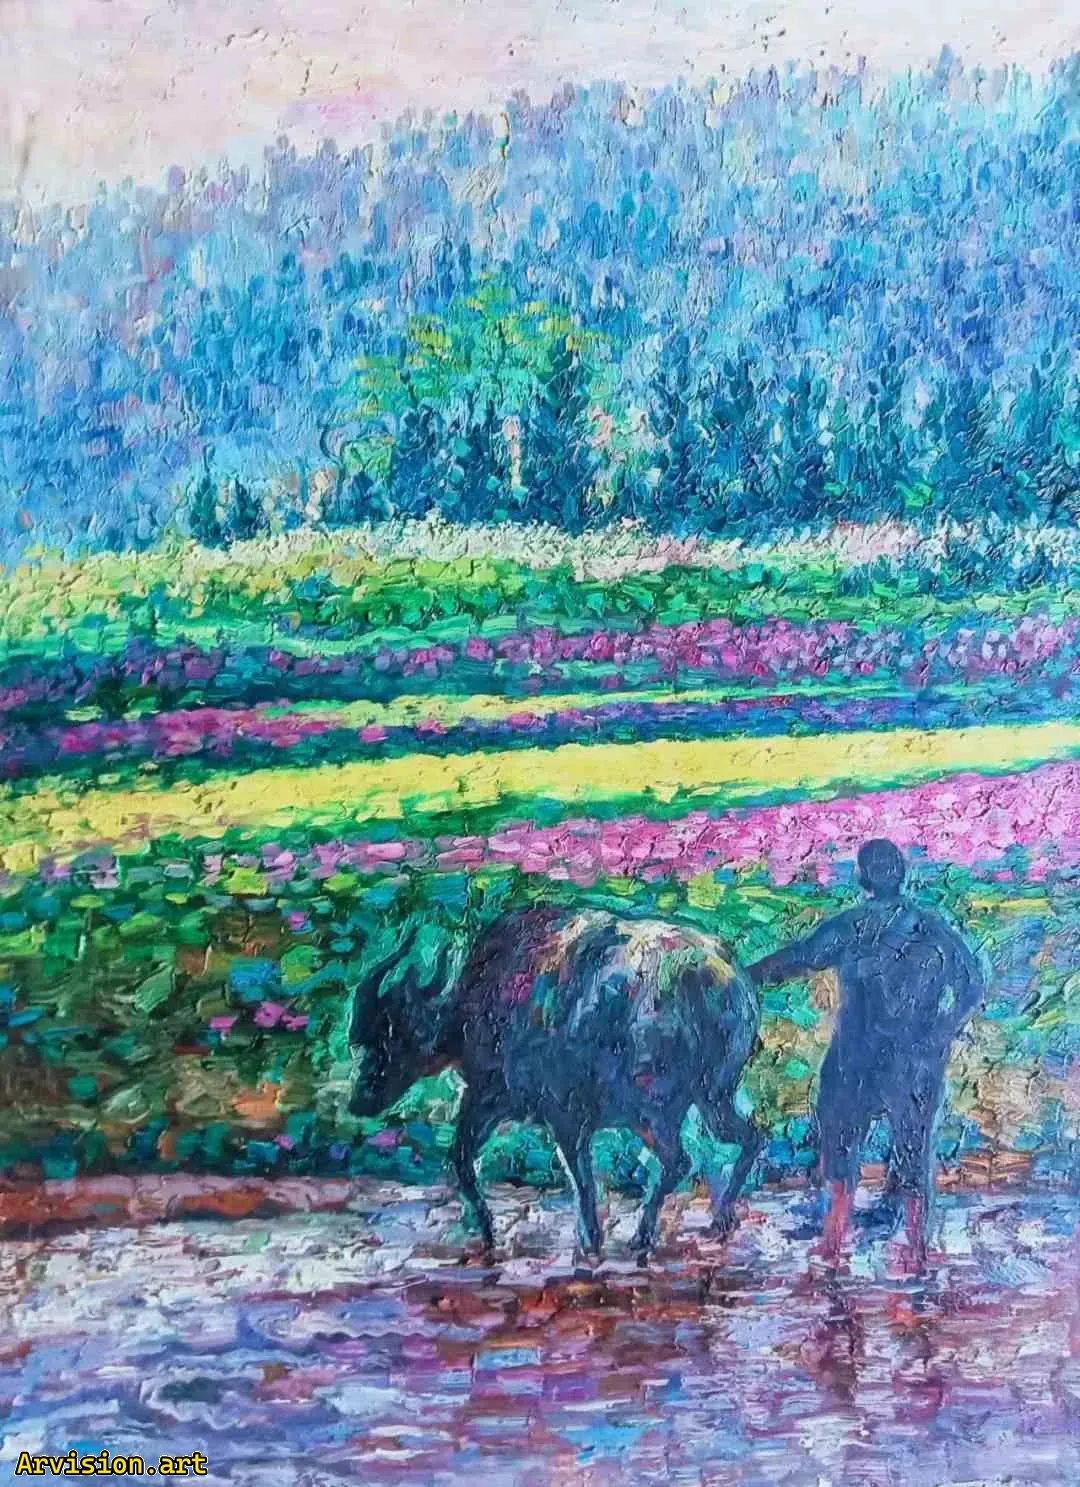 Wang Lin's oil painter is diligent and early in spring